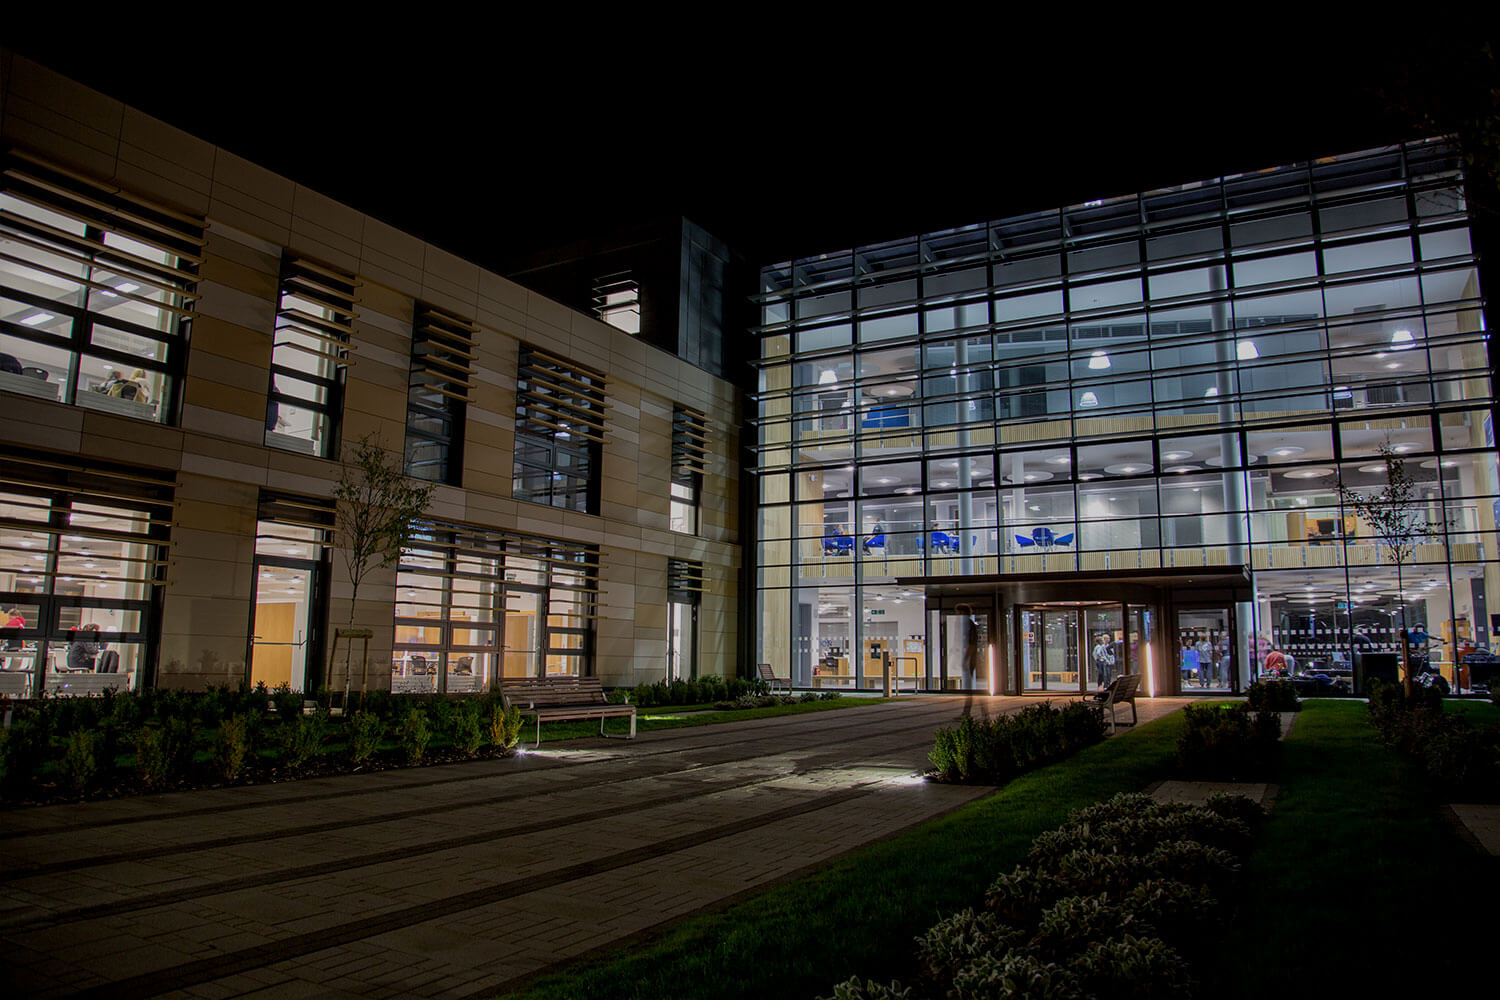 Front of the Commons building at night